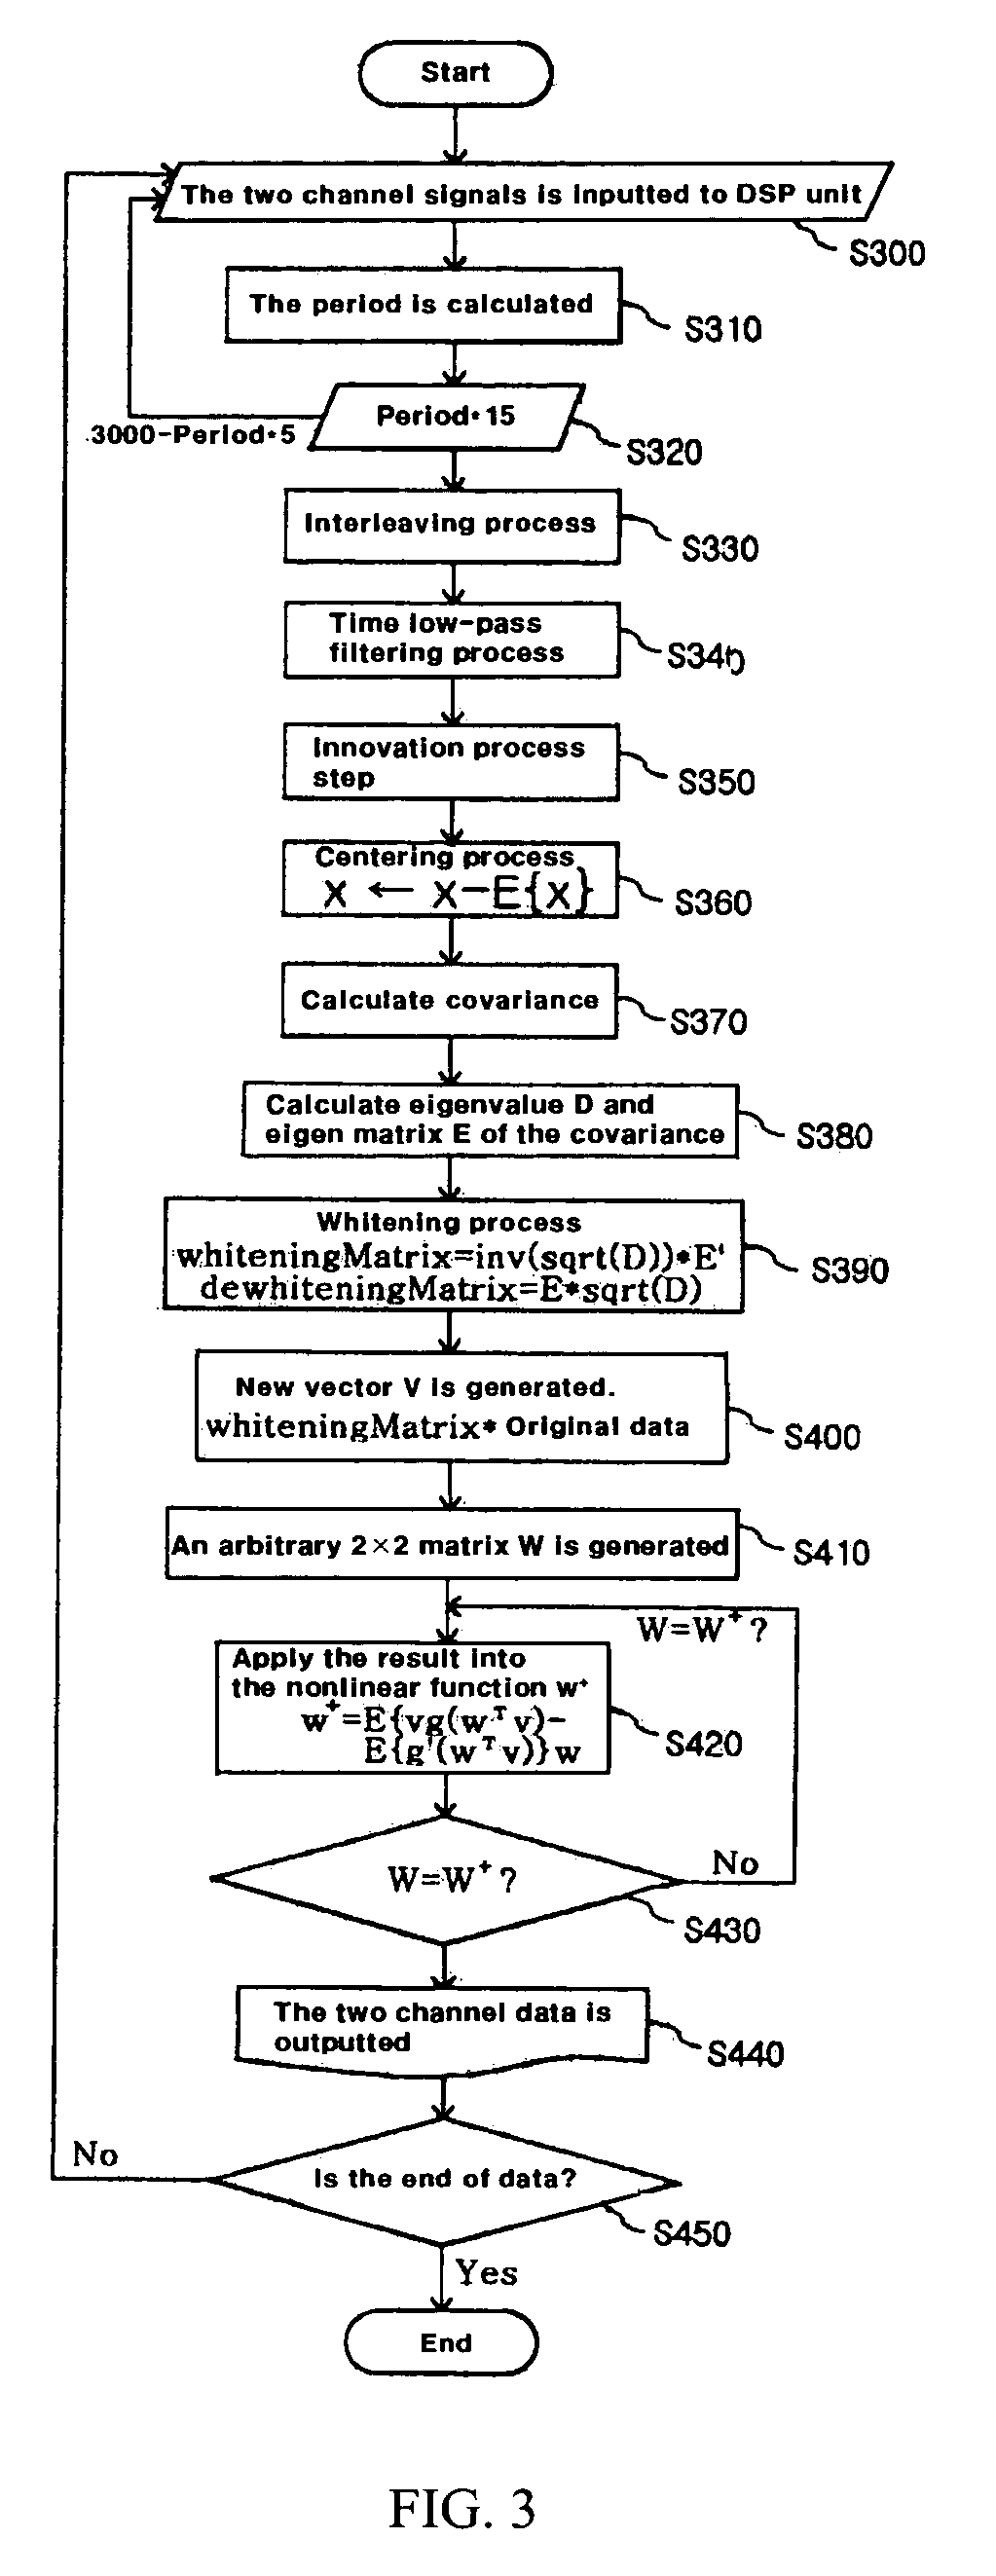 Photoplethysmography (PPG) device and the method thereof